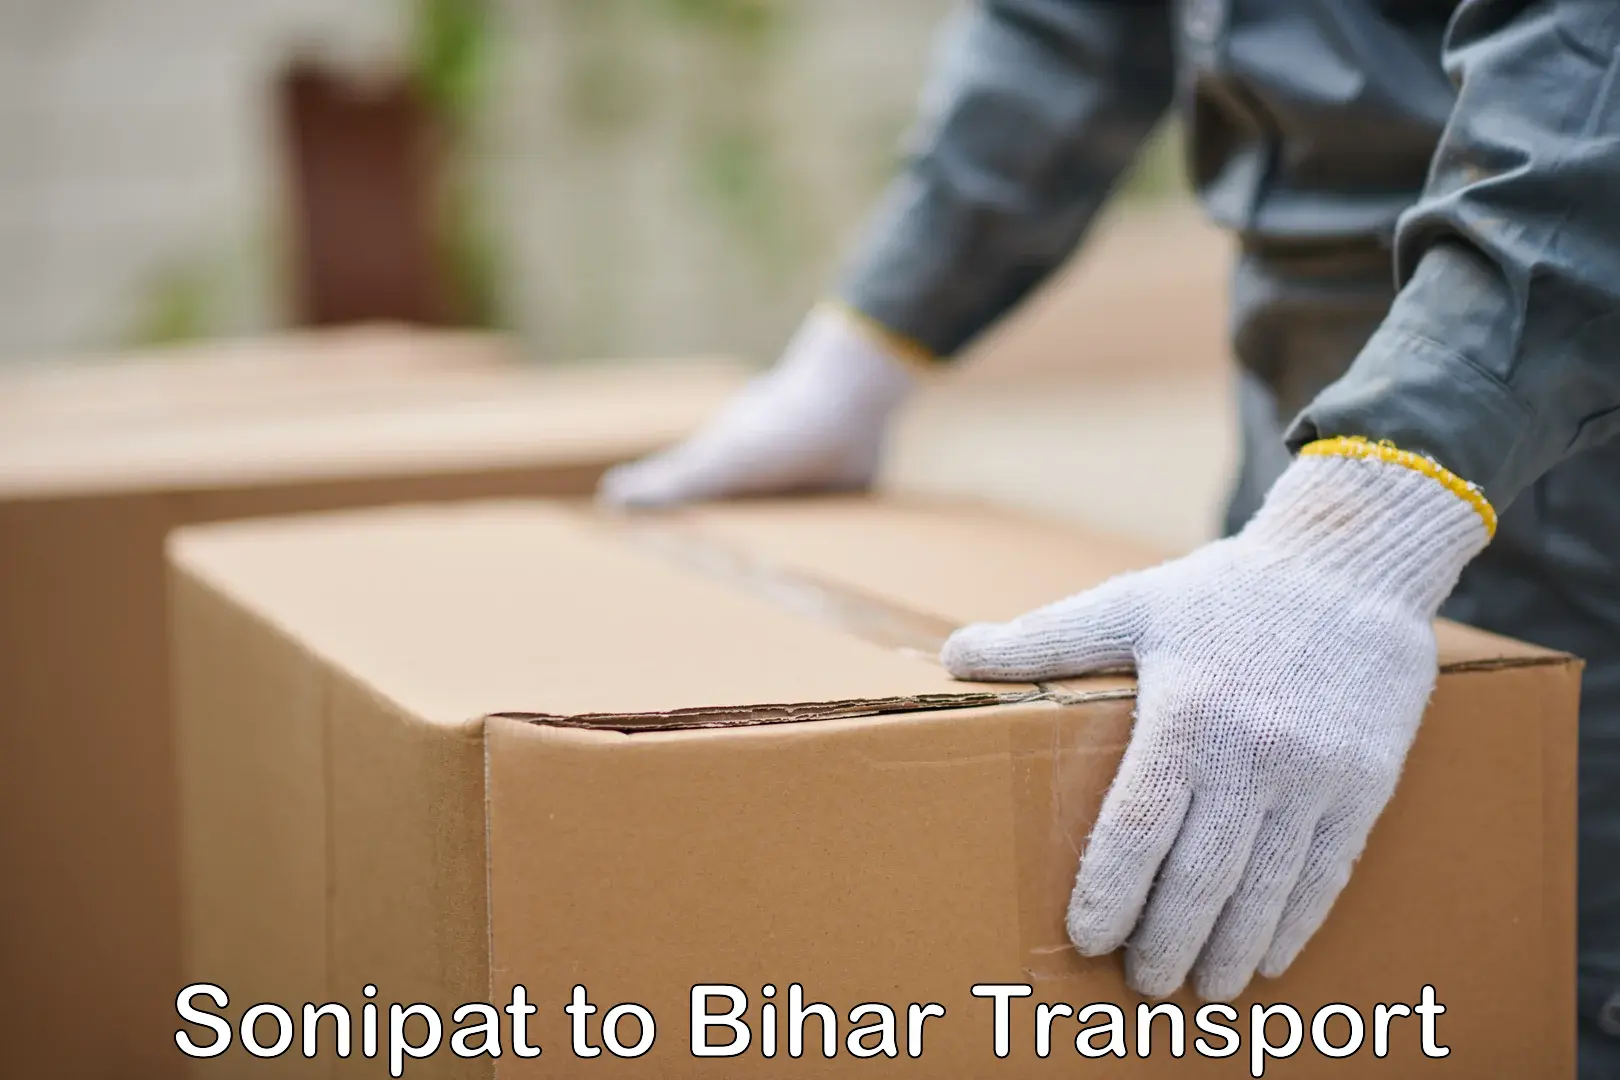 Container transport service Sonipat to Narkatiaganj